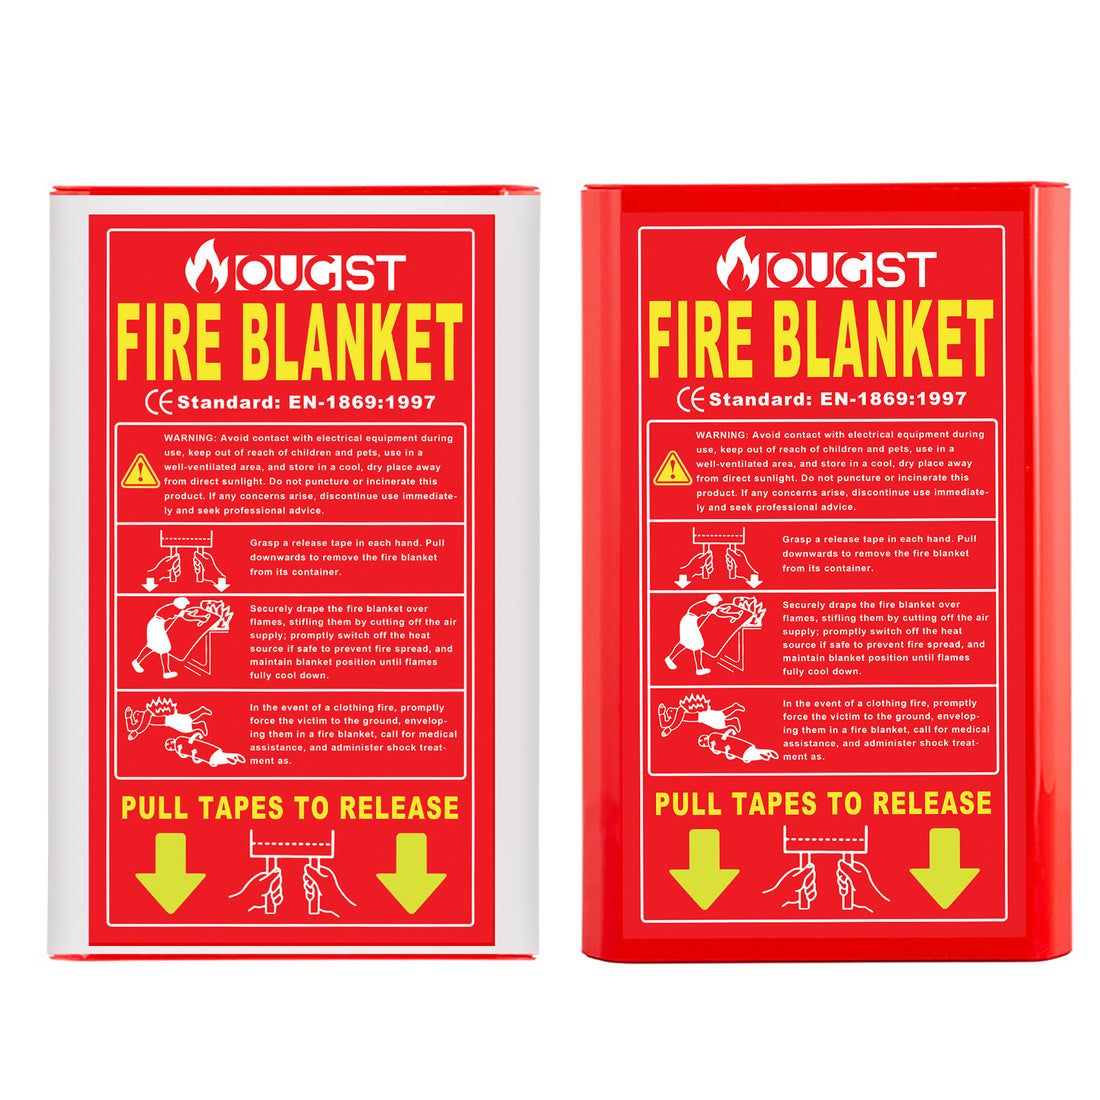 Do fire blankets really work?